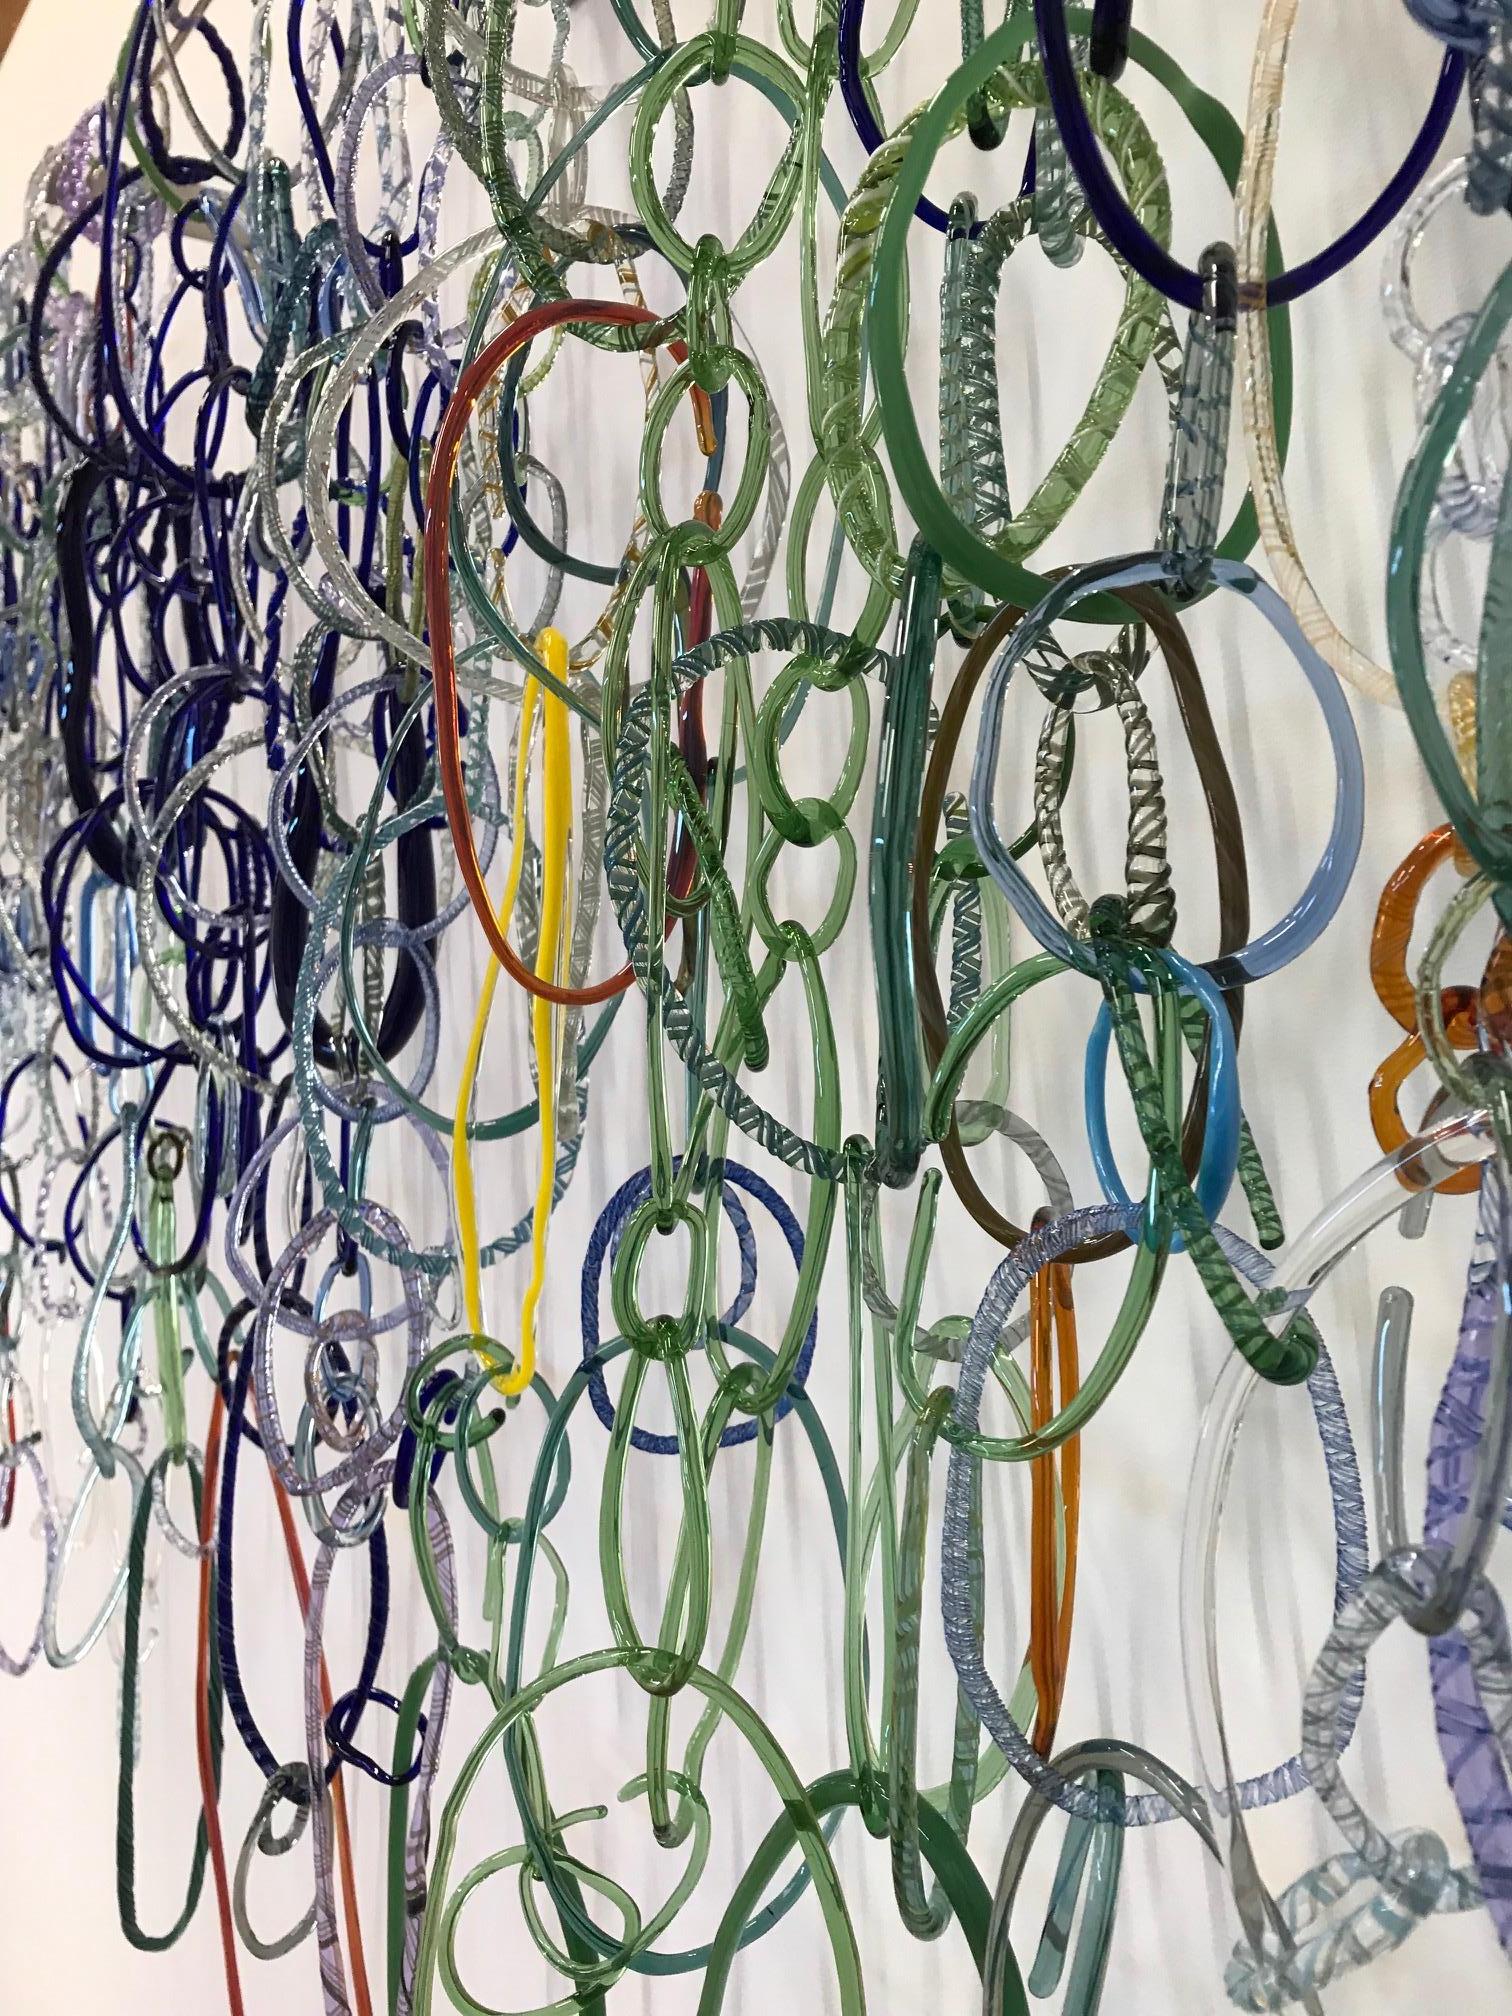 This wide horizontal hanging sculpture is composed of freeform circular loops in various shapes and textures of blue, teal, green, brown and gold torch worked borosilicate glass, linked together and hanging from a long clear glass rod installed with